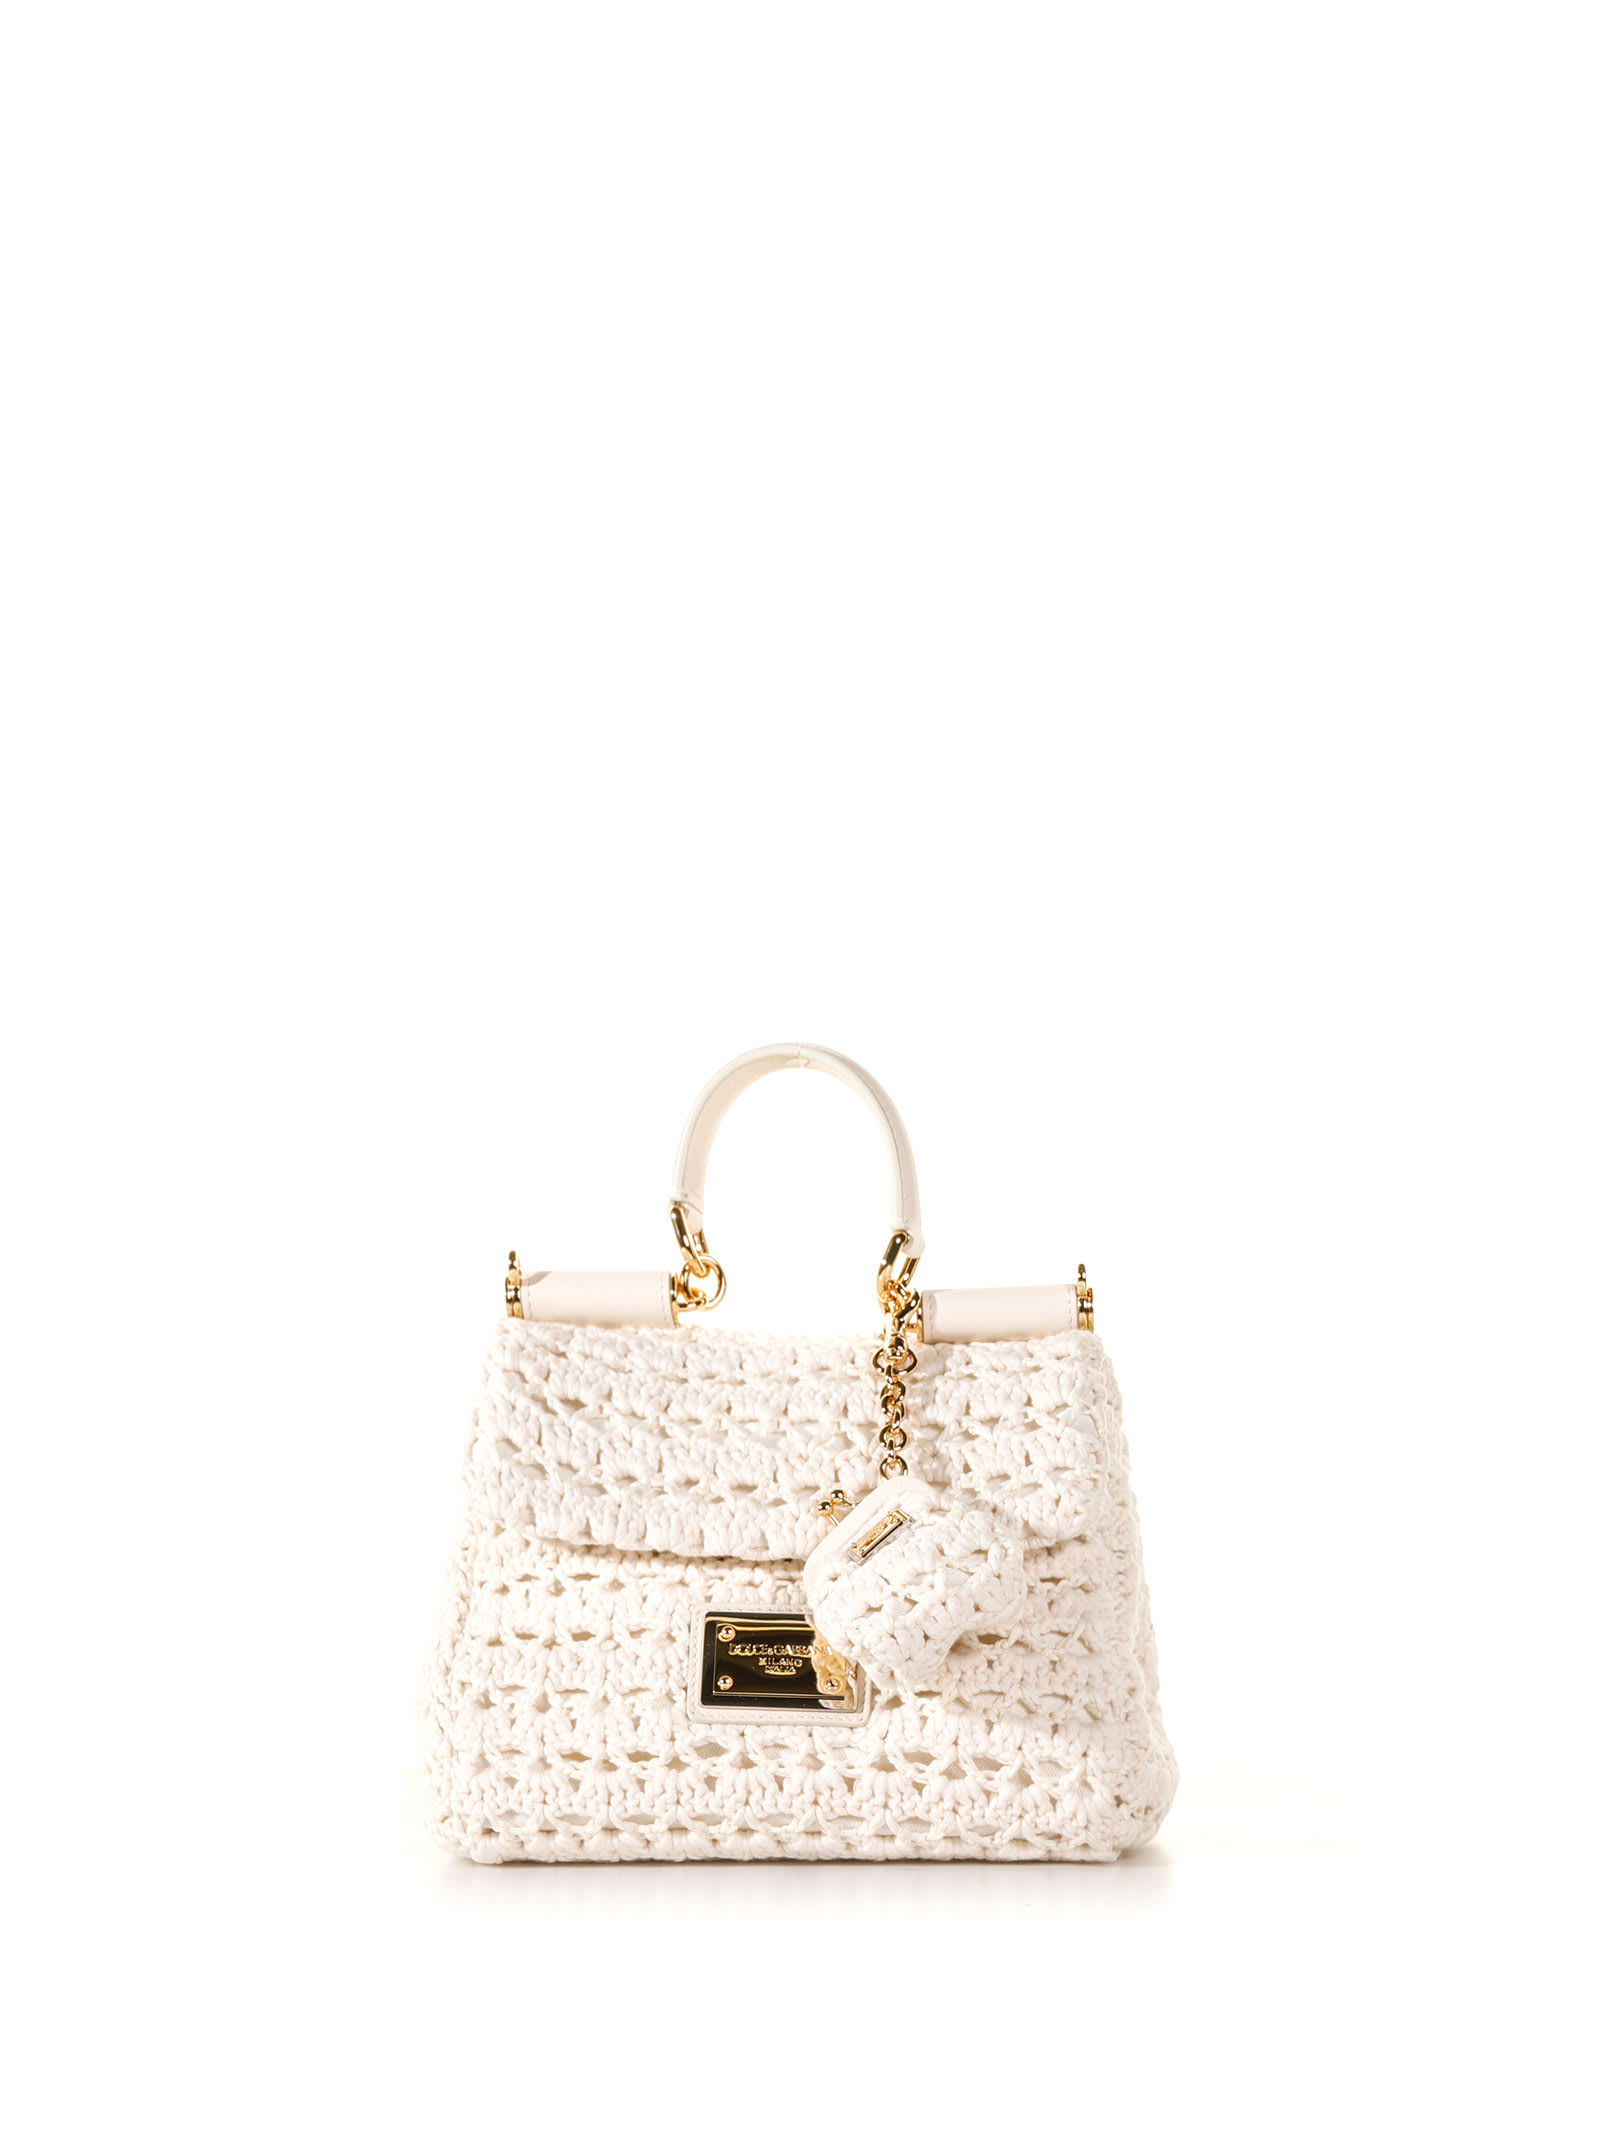 Dolce & Gabbana Small Sicily Soft Bag With Charm In Bianco Naturale